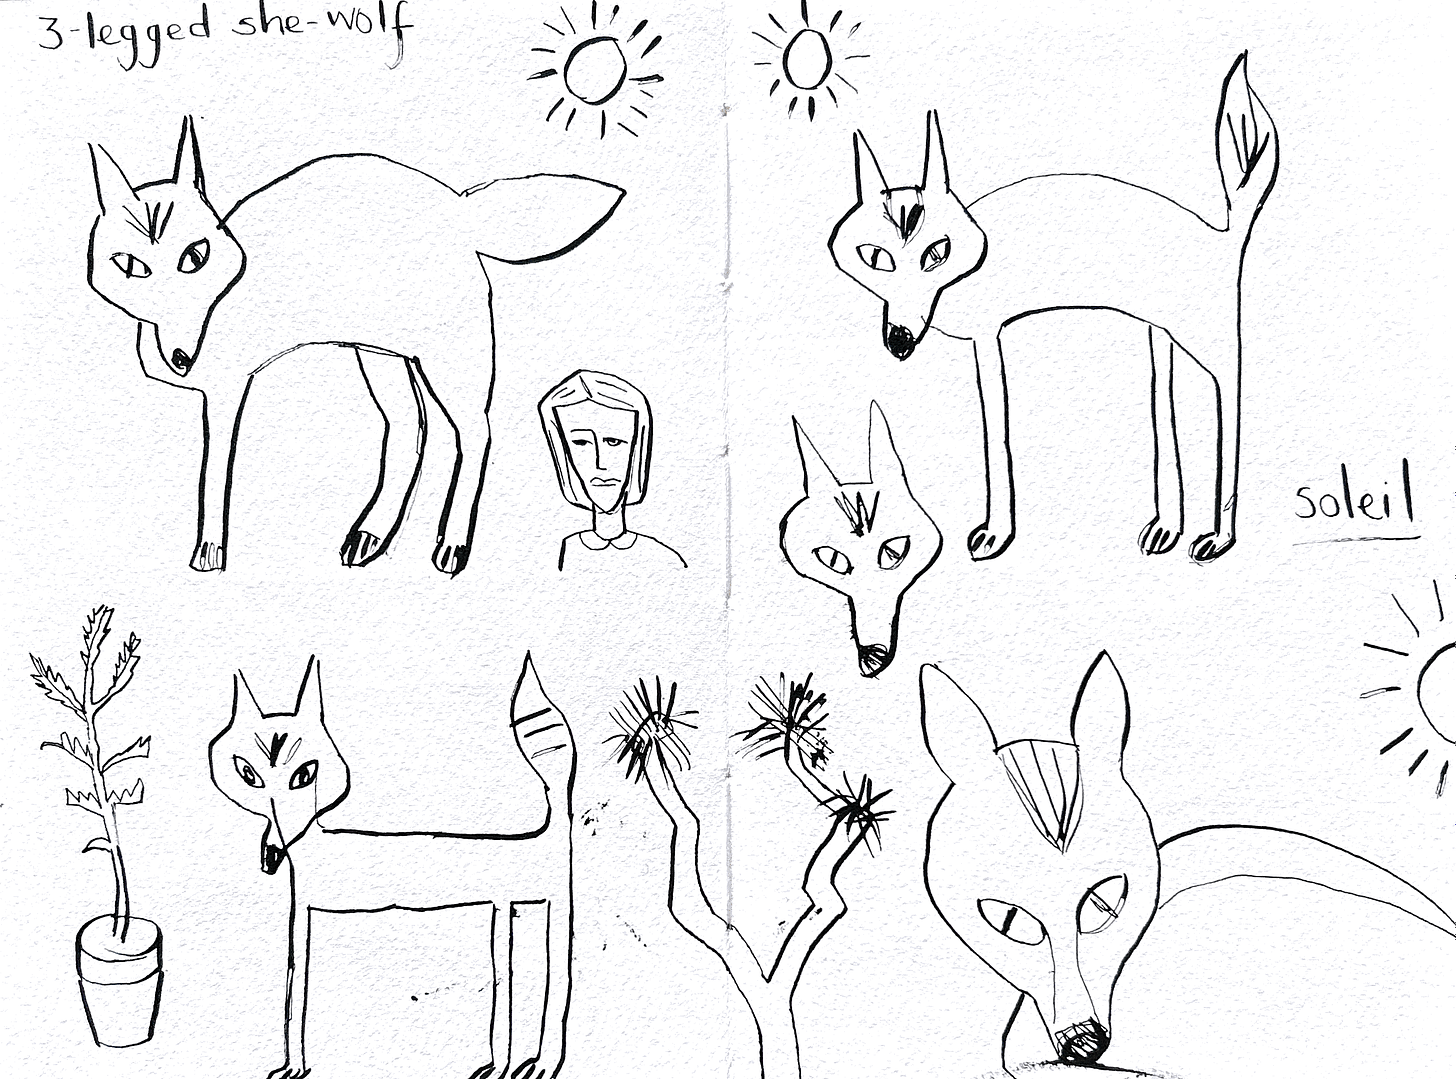 two pages of drawings of she-wolf